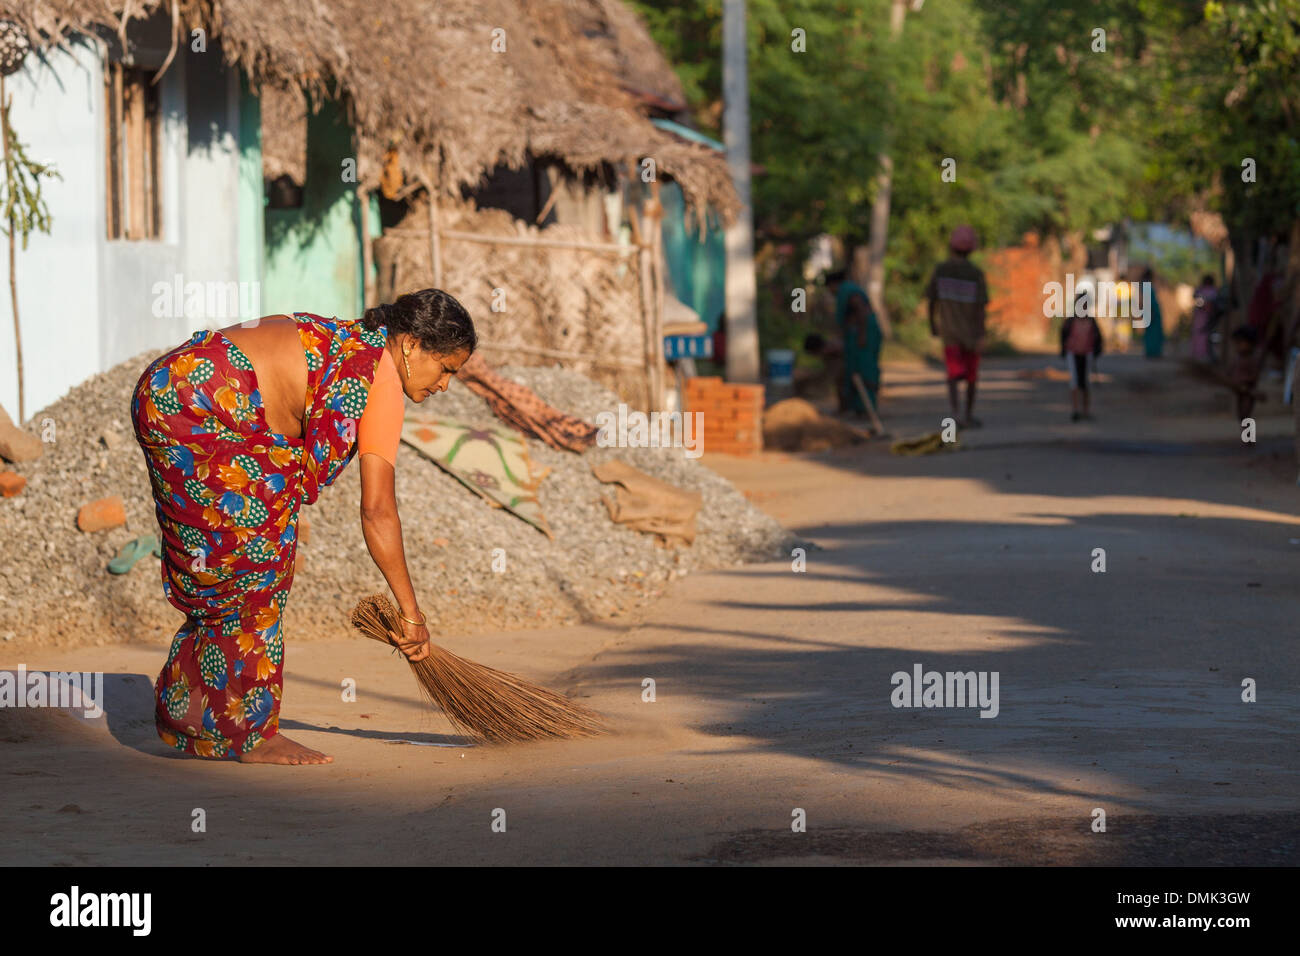 OLD INDIAN WOMAN DRESSED IN A TRADITIONAL SARI SWEEPING IN FRONT OF HER HOUSE IN A VILLAGE IN THE FARMING REGION OF CHETTINAD, STATE OF TAMIL NADU, IINDIA Stock Photo